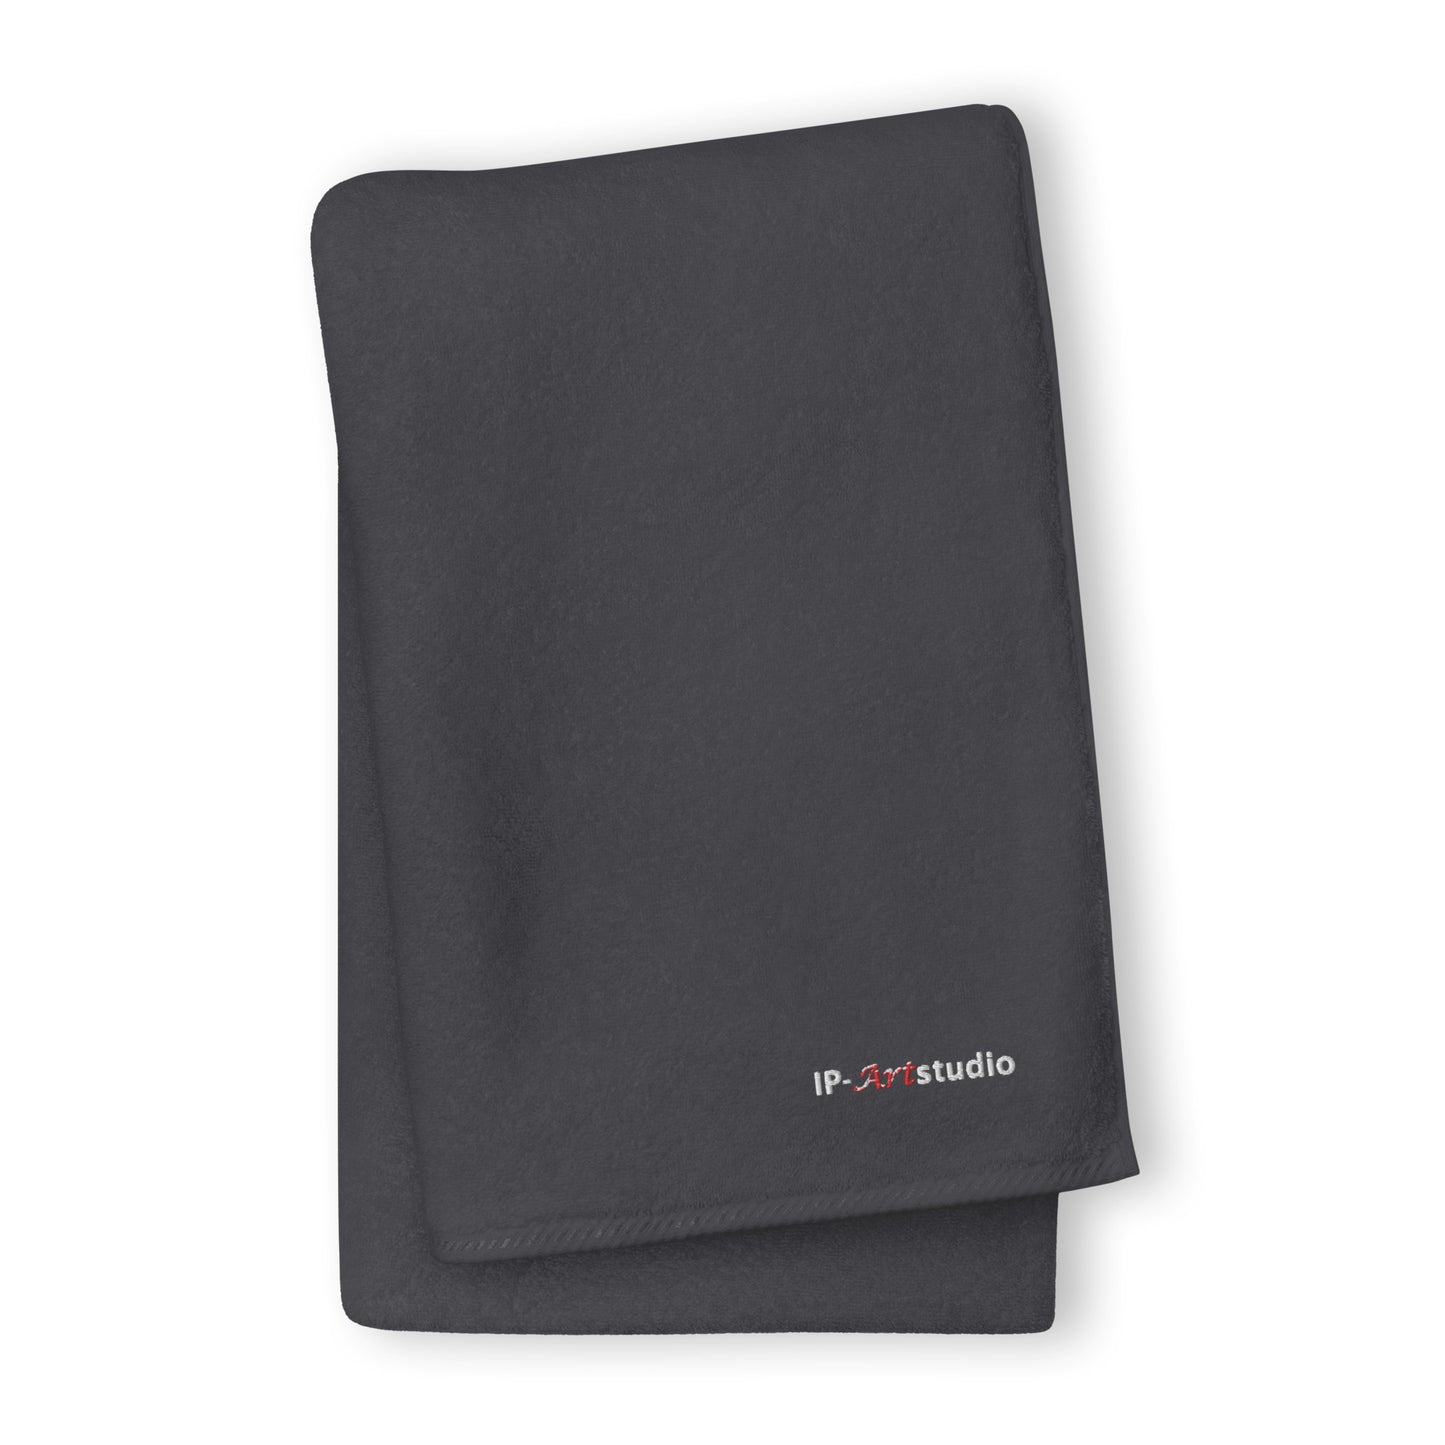 Cotton towel for fitness drive